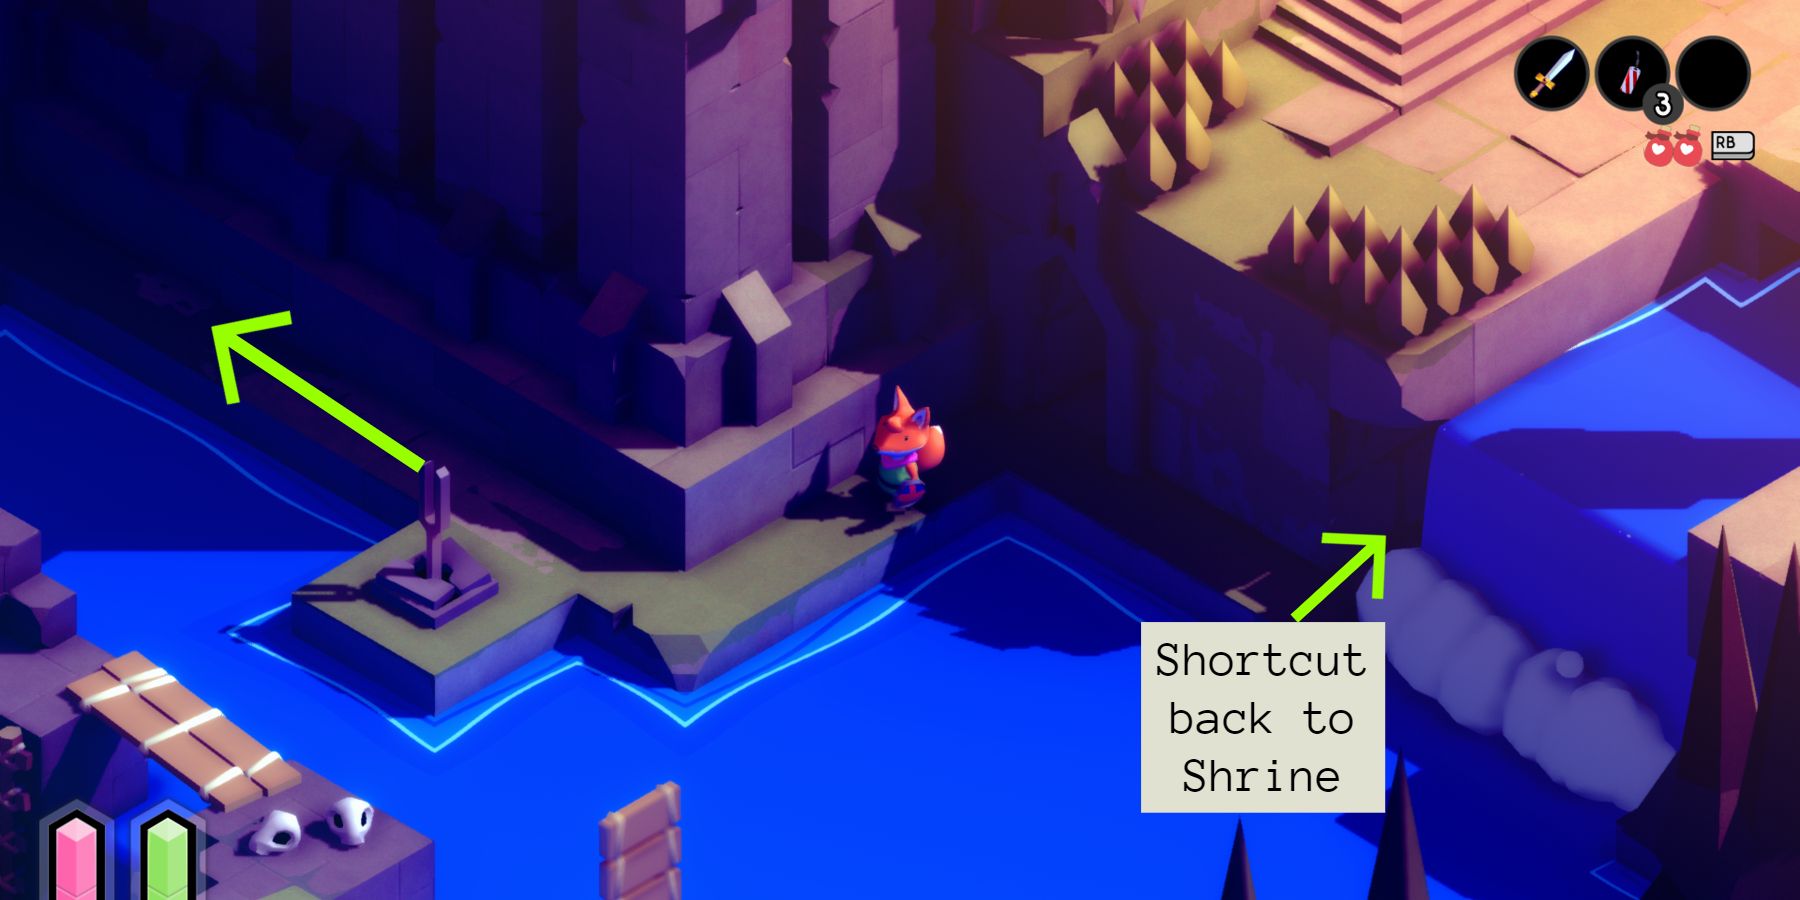 small red fox in a green tunic stands on a small path by the edge of a lake with one green arrow pointing away around a corner to the left and another pointing to a path behind a waterfall with the words "shortcut back to shrine" below it